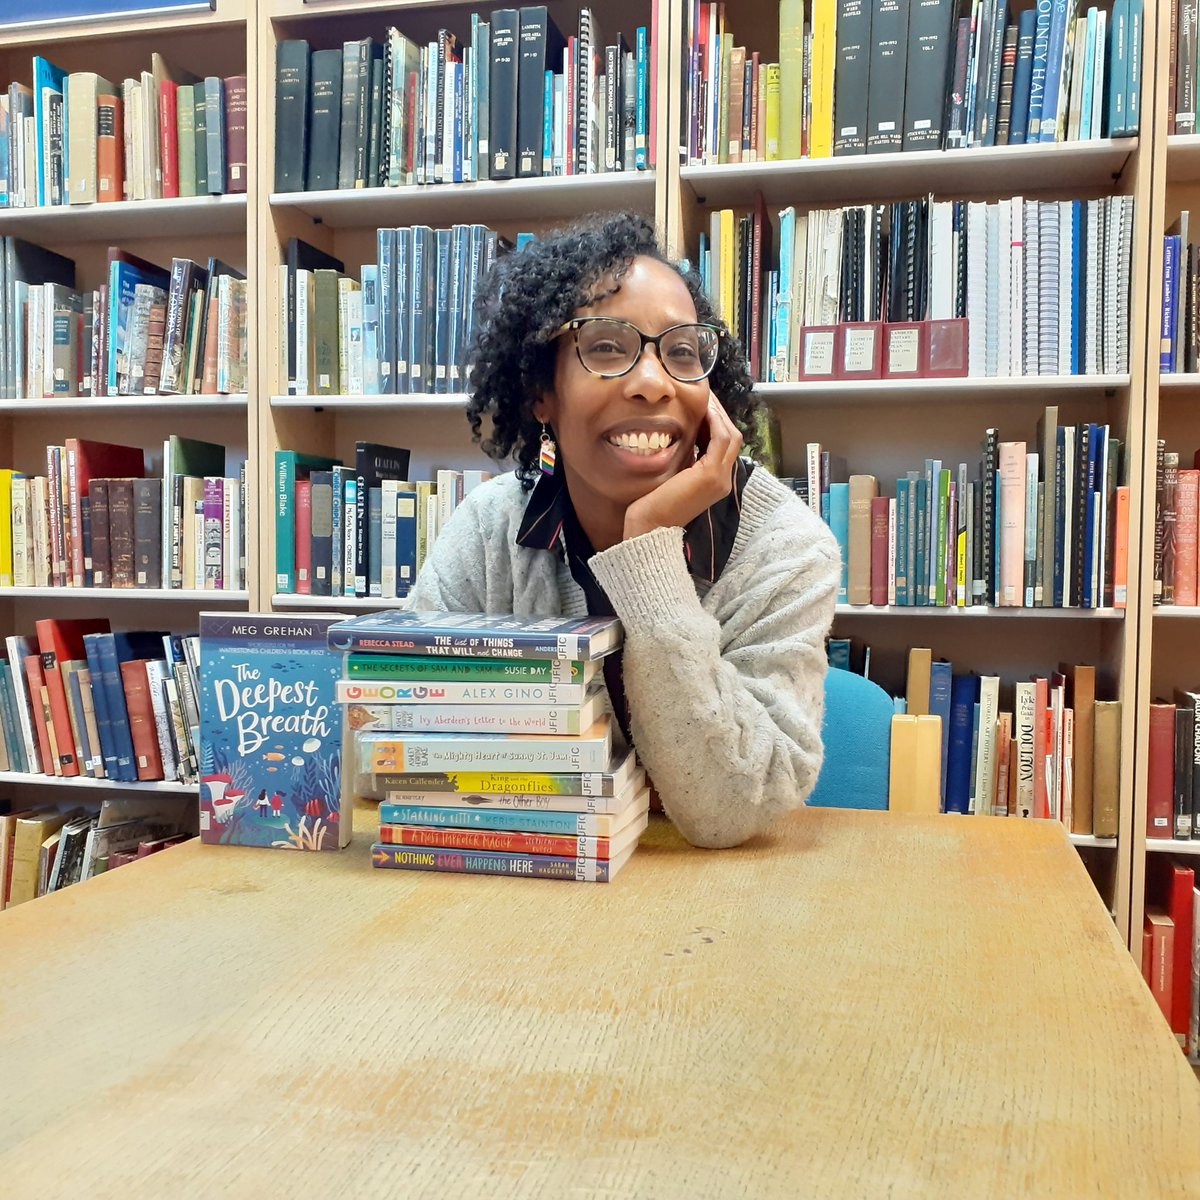 It is time to introduce our second judge! It is an honour to have @Zoey_Dixon on our shortlist panel #OBP24. Zoey works for Lambeth Libraries combining her strategic and management roles, with the planning & delivery of quality frontline services to children and young people.